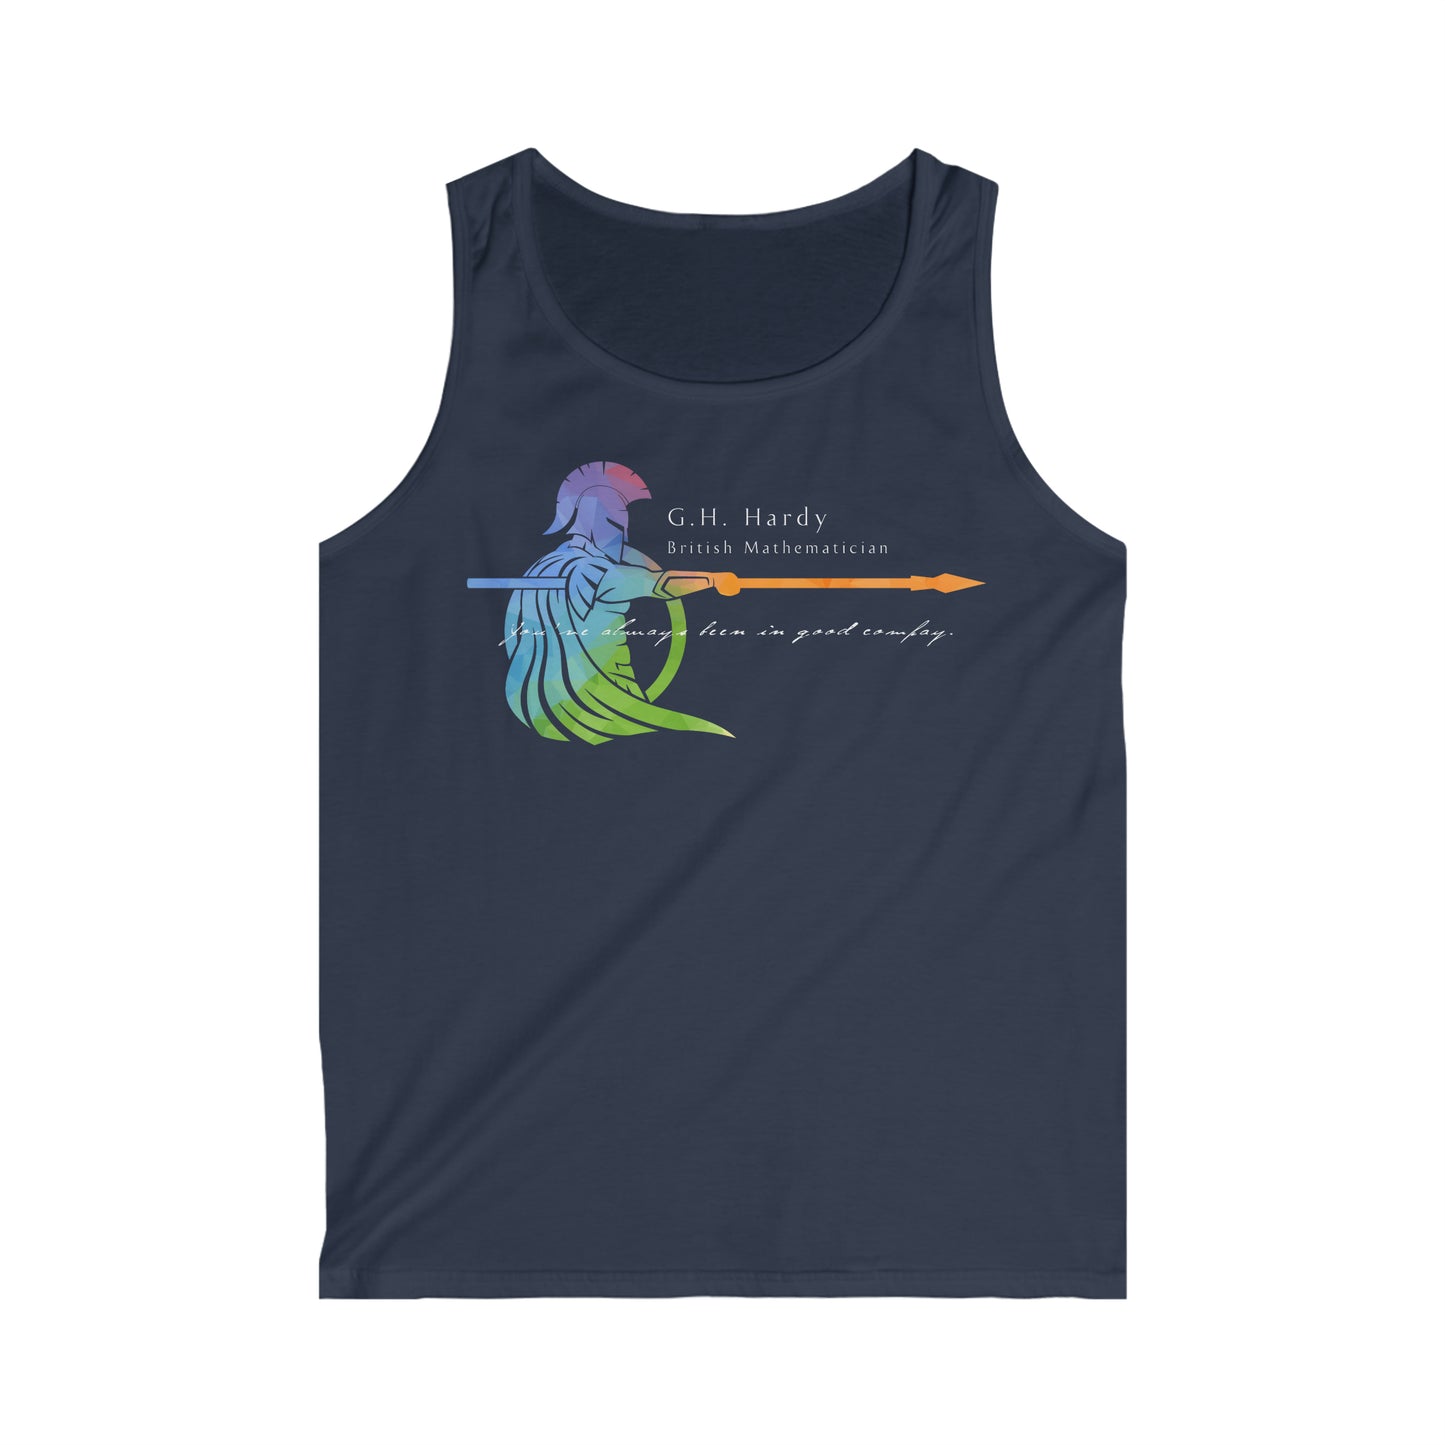 G.H. Hardy | Biologist & Mathematician | Pride Jersey Tank Hardy–Weinberg Principle Gay LGBT Queer